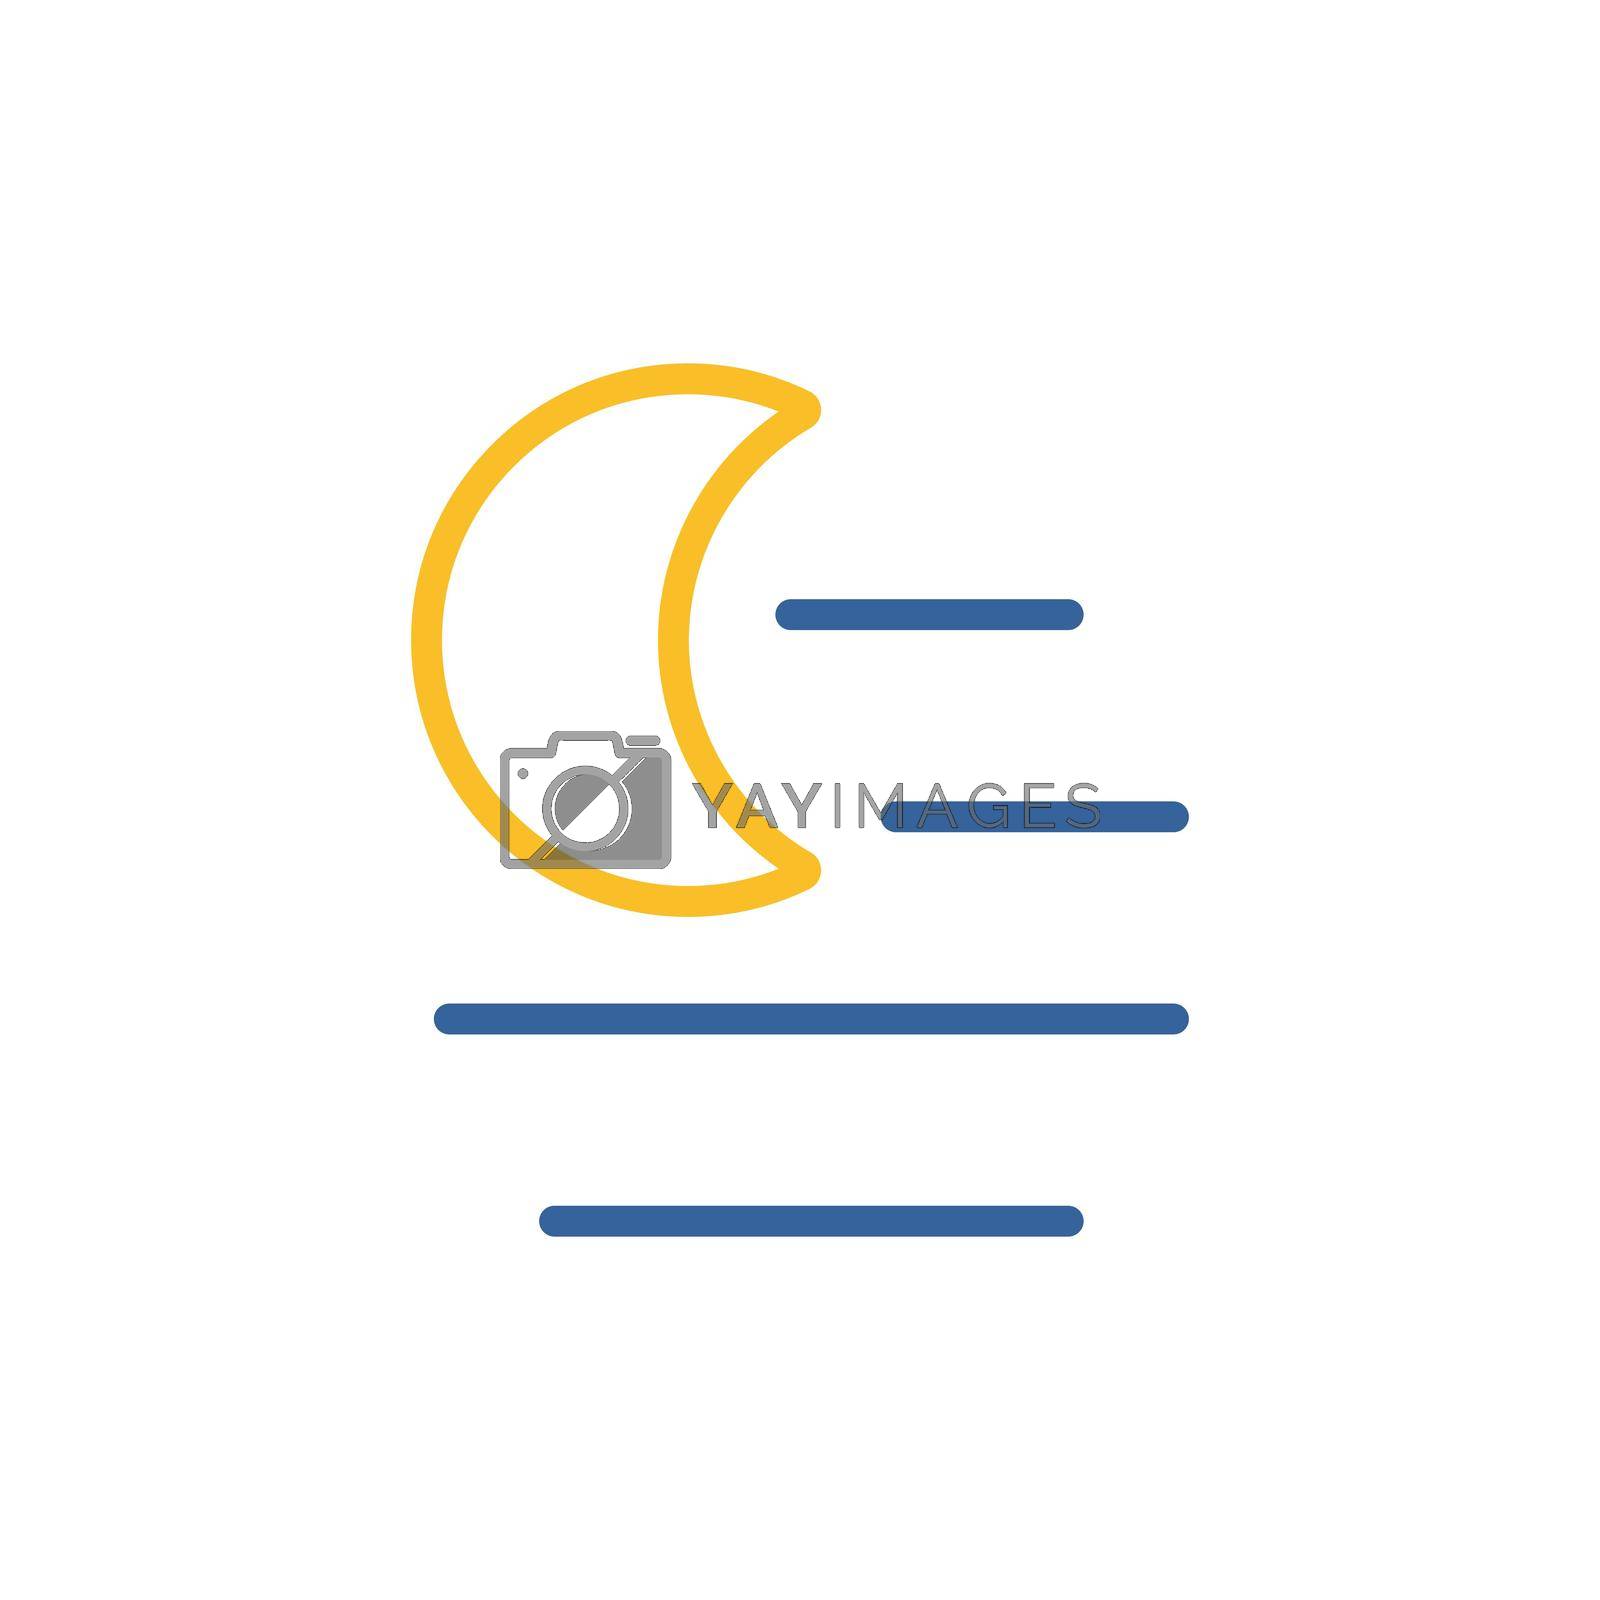 Fog night isolated vector icon. Meteorology sign. Graph symbol for travel, tourism and weather web site and apps design, logo, app, UI